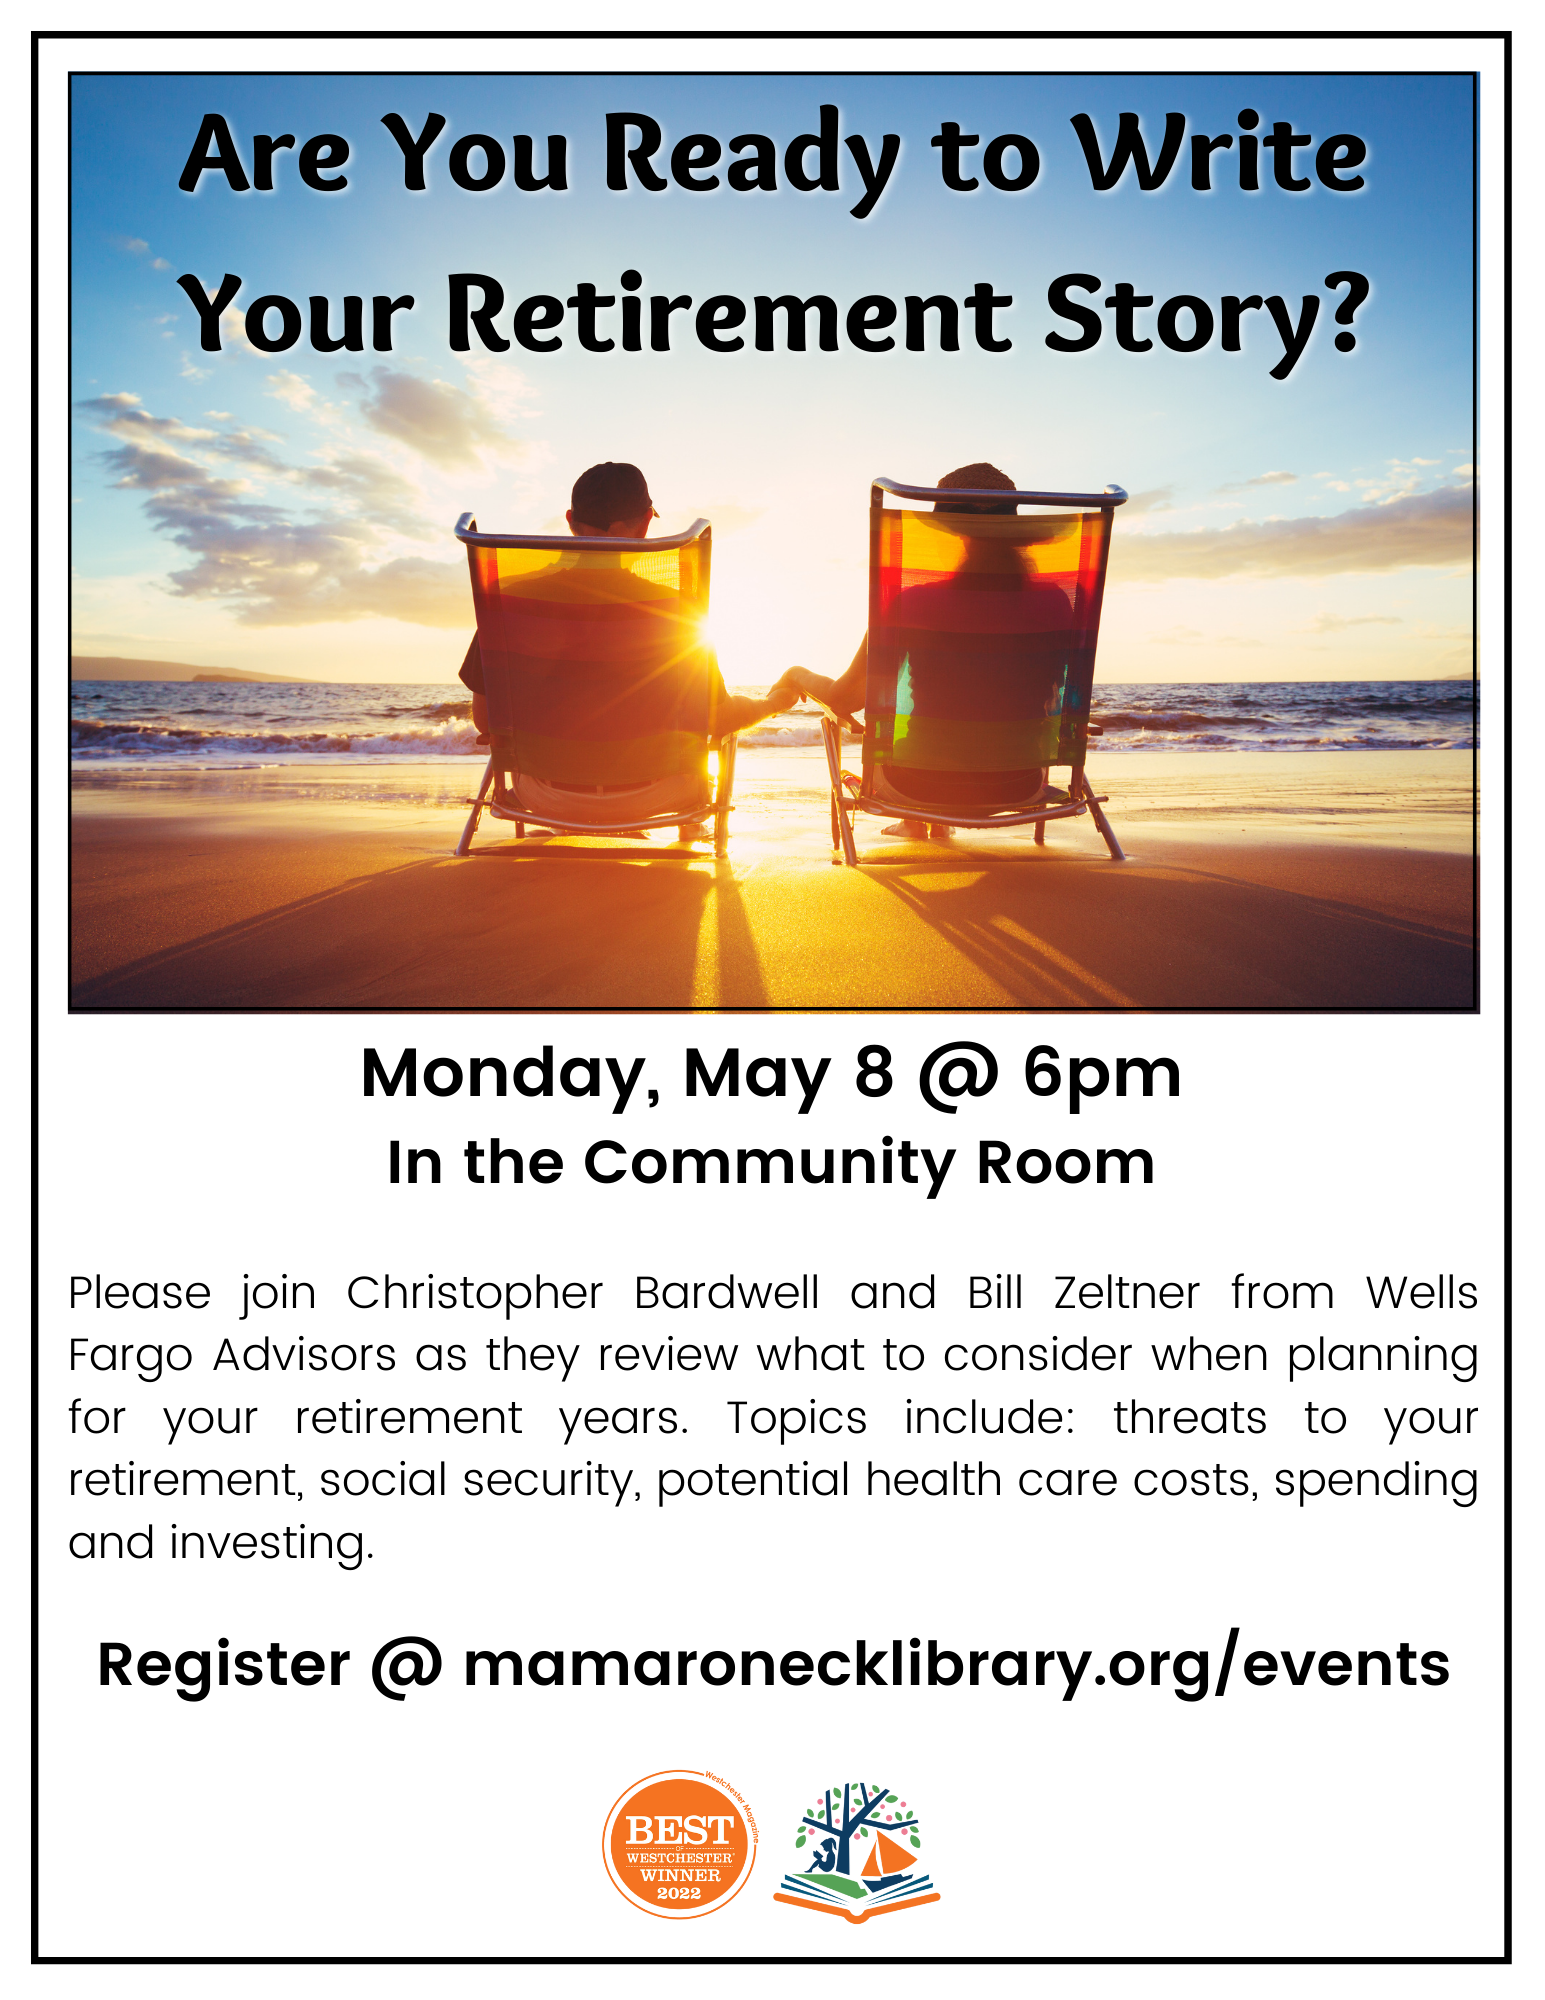 write your retirement story may 8th